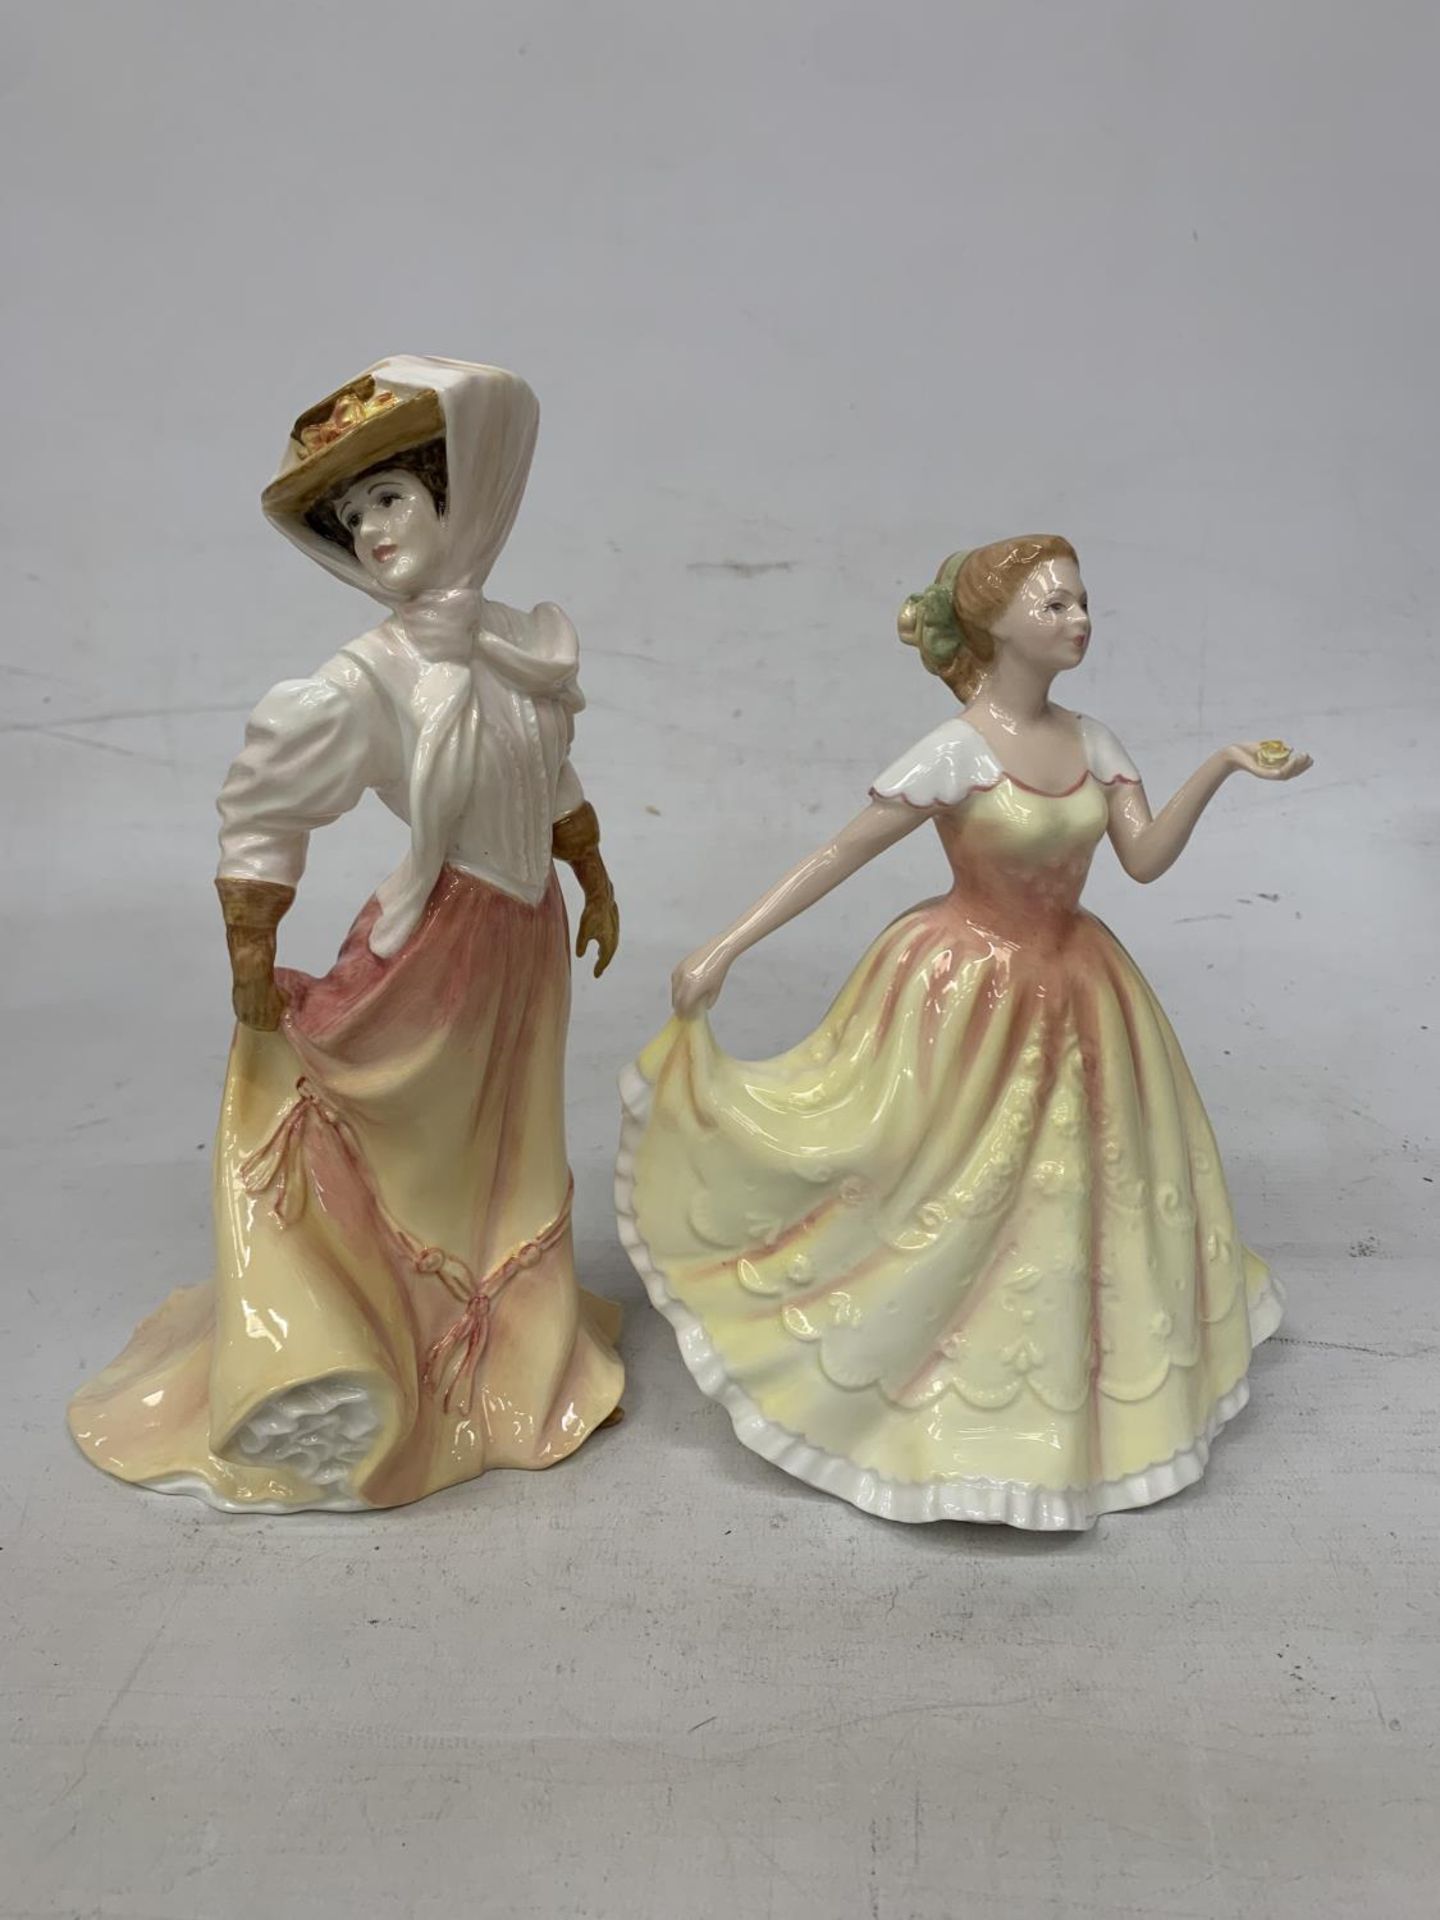 TWO ROYAL DOULTON FIGURES "THE OPEN ROAD" HN 4161 AND FIGURE OF THE YEAR " DEBORAH" HN 3644